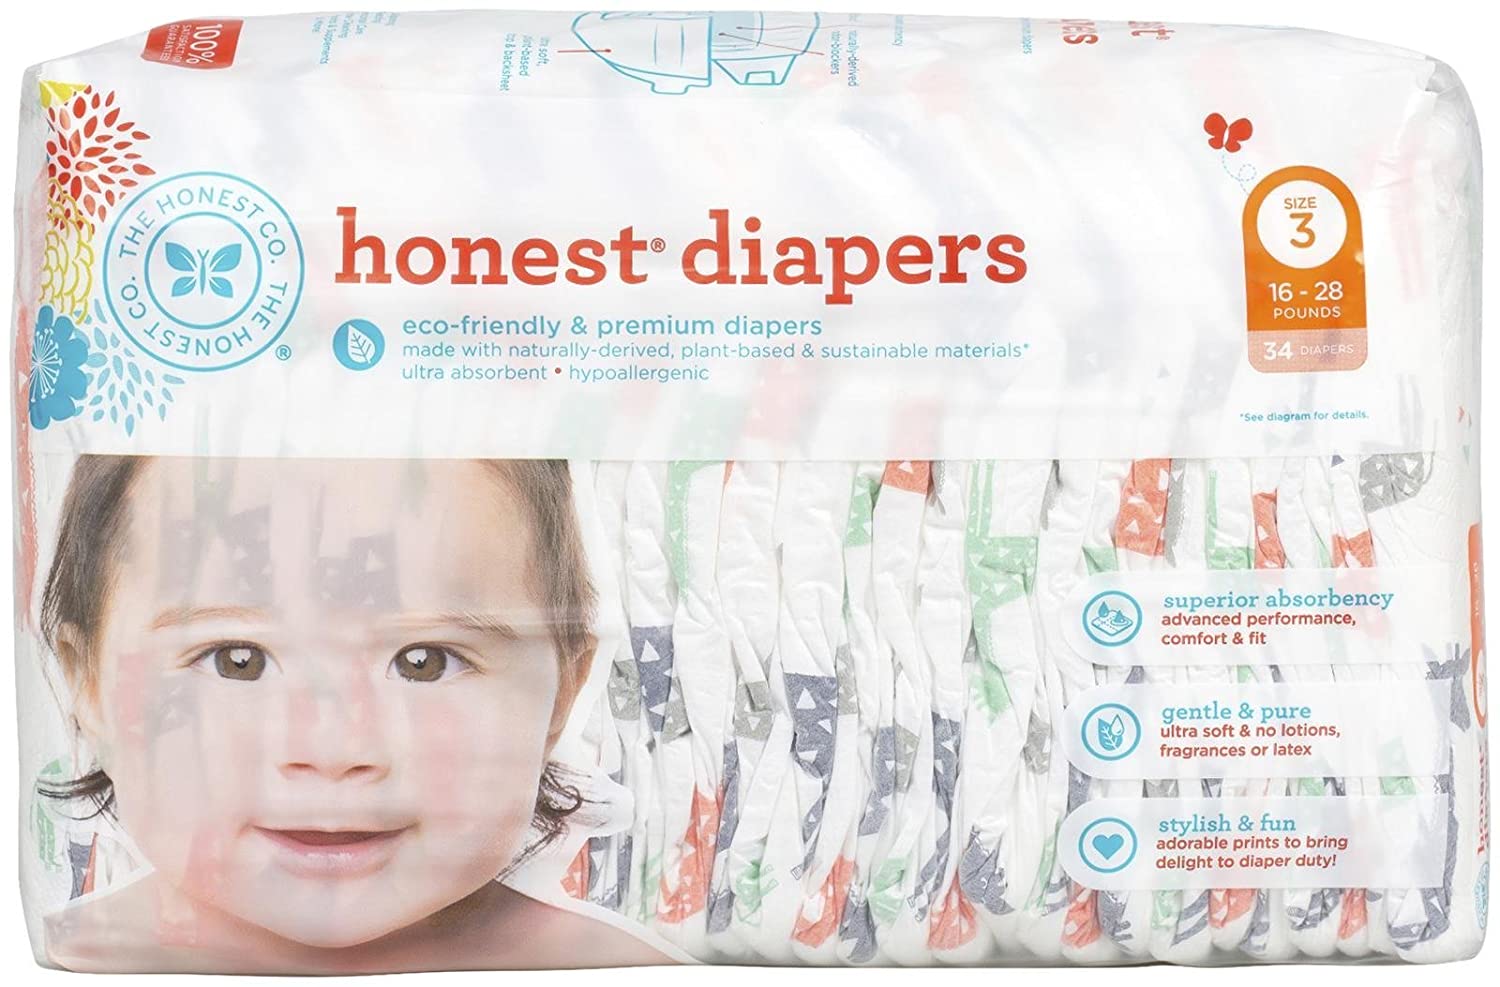 Top 7 Best Natural Disposable Diapers Reviews in 2022 6